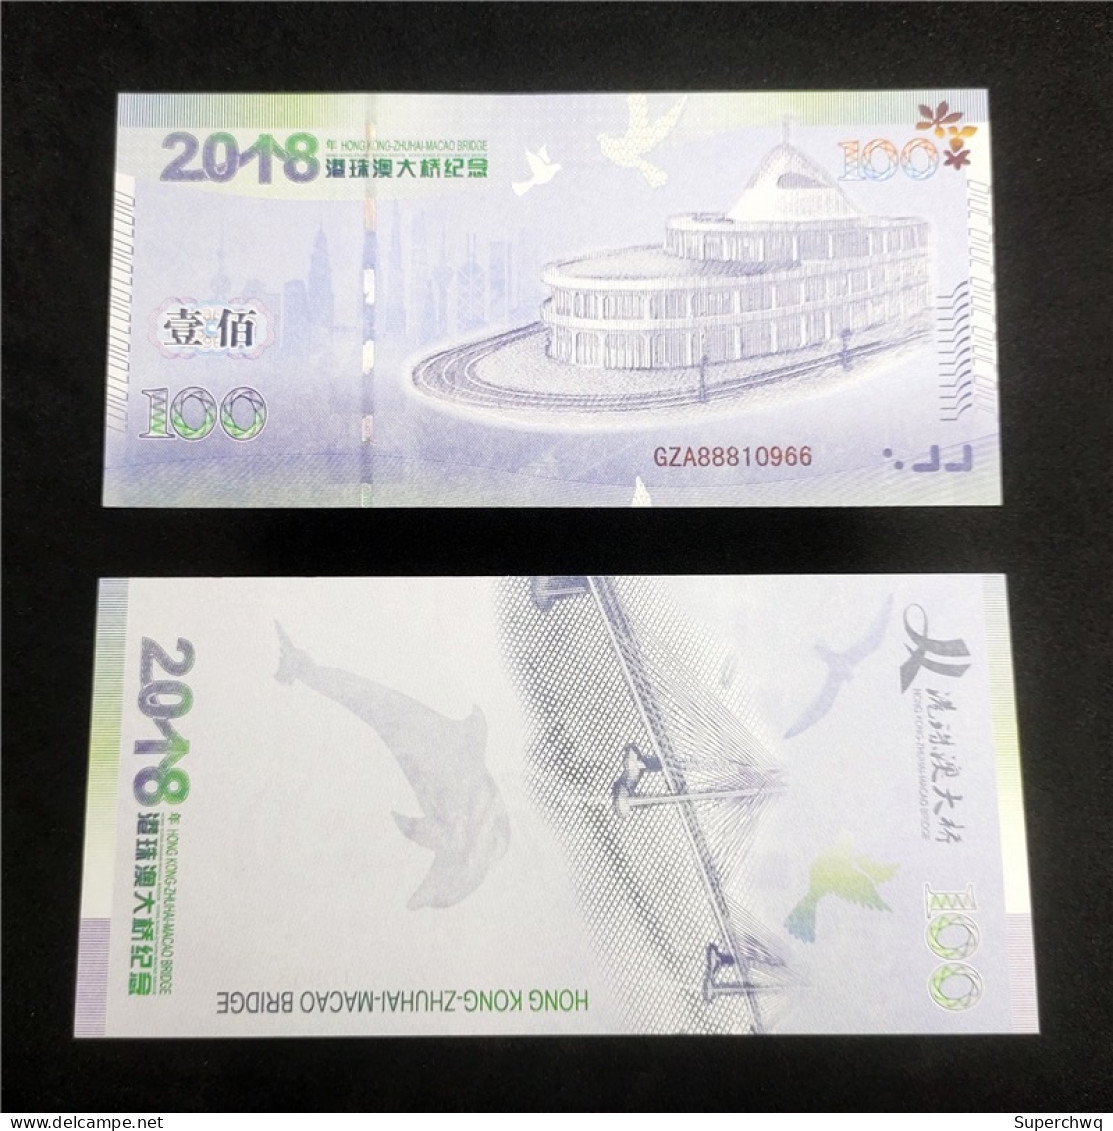 China Banknote Collection ，2018 Hong Kong Zhuhai Macao Bridge Commemorative Fluorescence Test Note，UNC - Chine